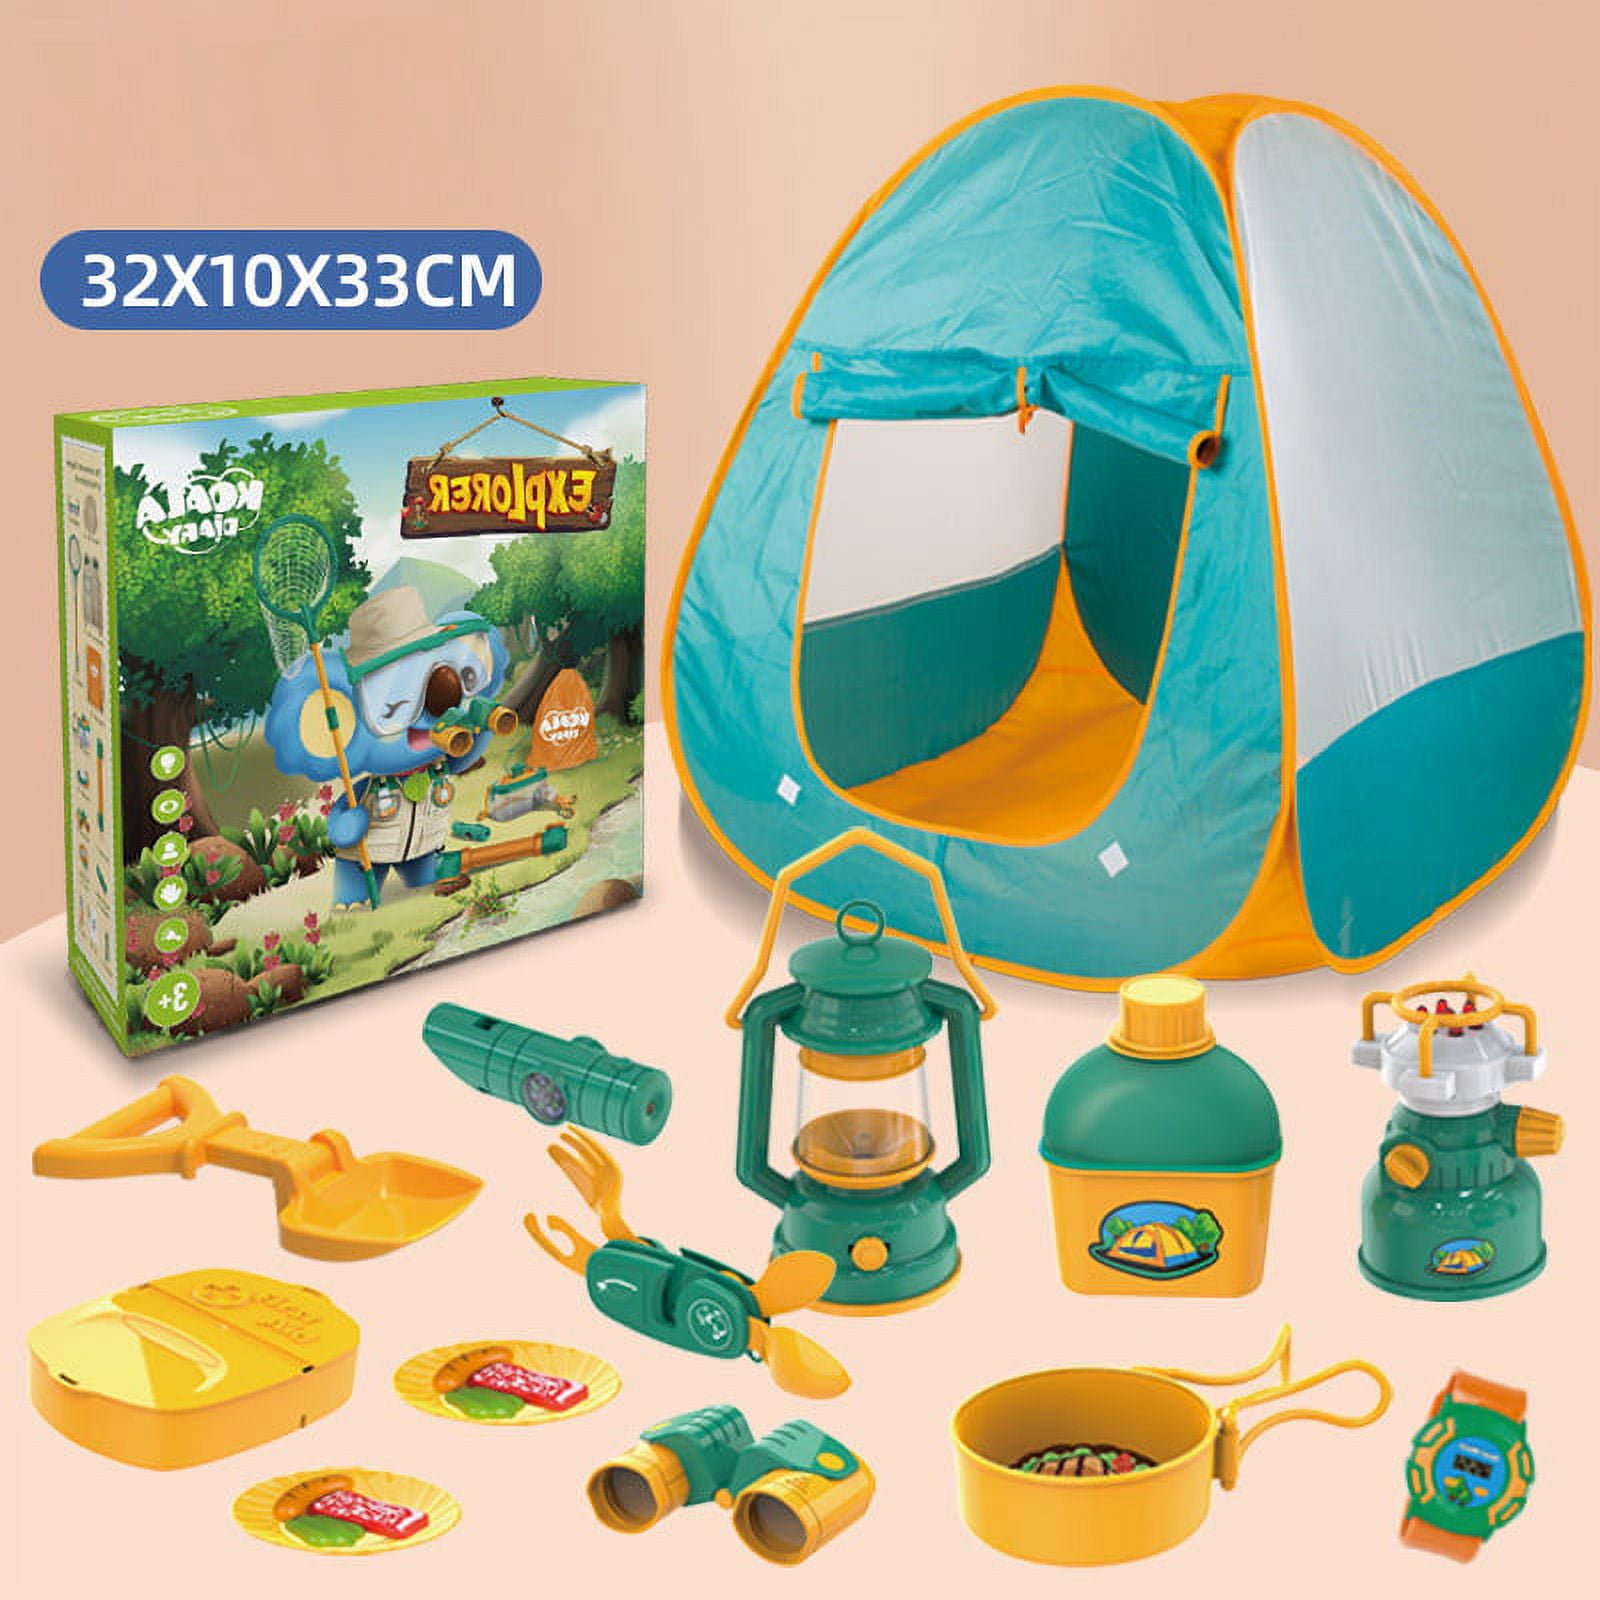 Toys coordinates Explorers Kids Pop Up Play Tent with Camping Gear Outdoor  Toy Tools Set (18 Pieces) 